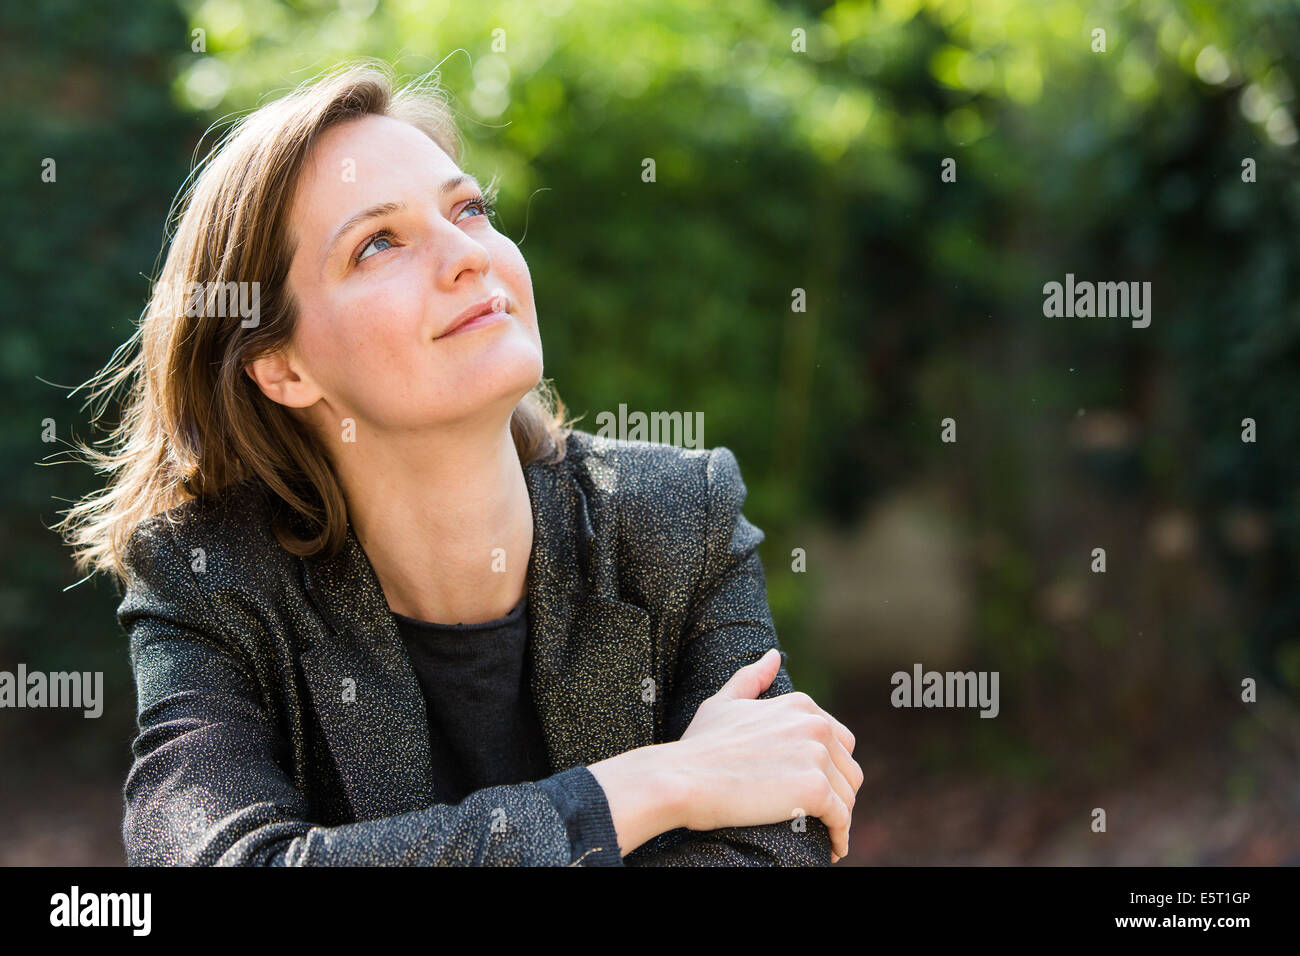 Woman resting outdoors. Stock Photo